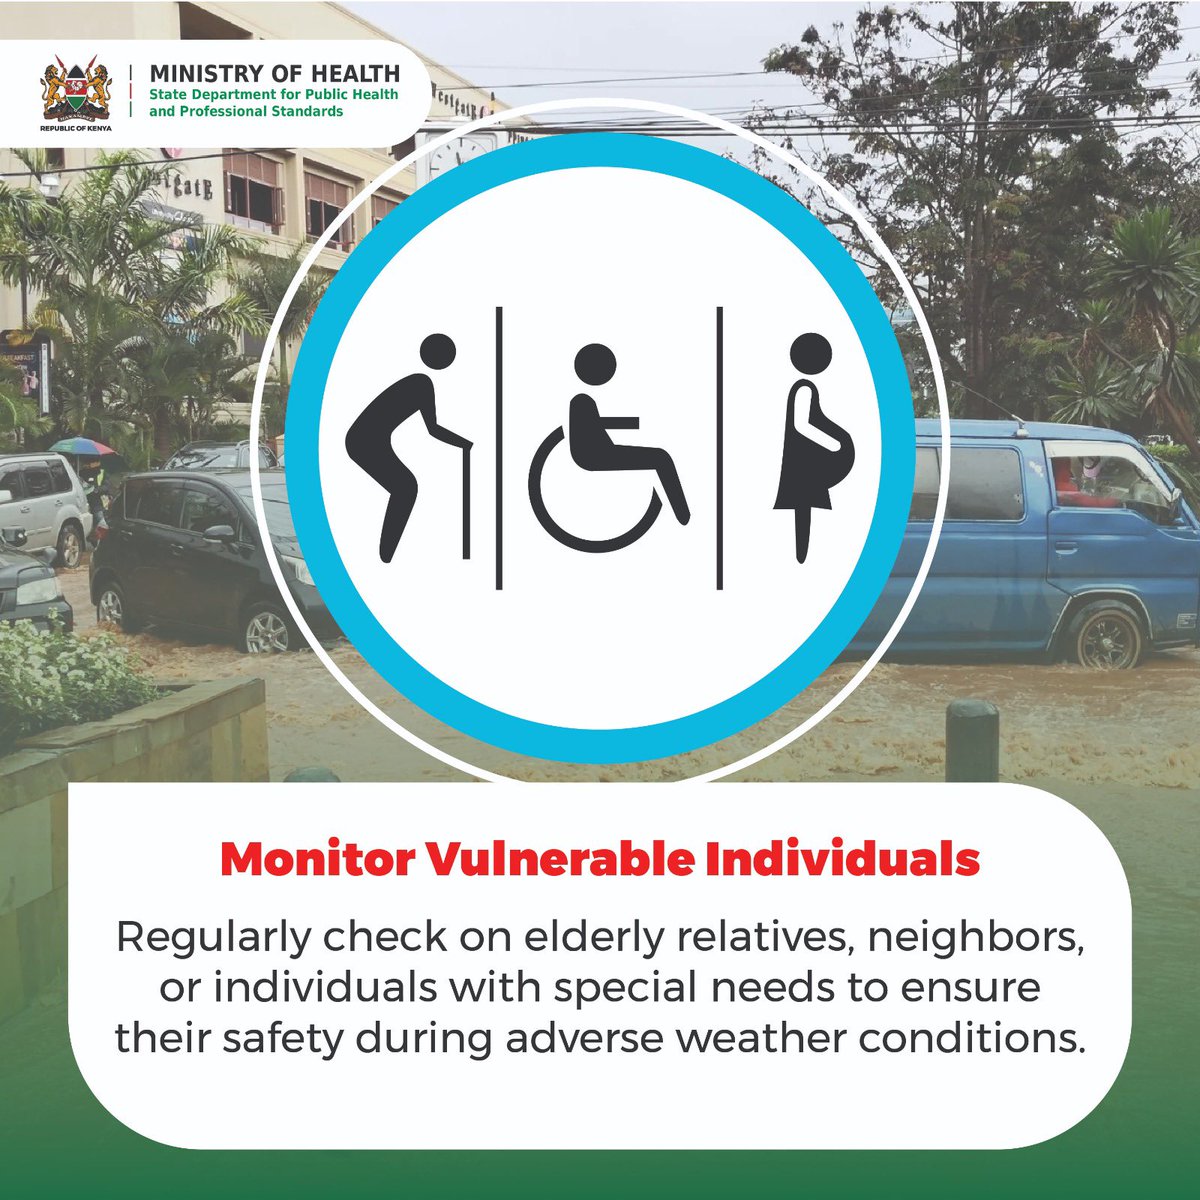 Remember to check on the most vulnerable during adverse weather conditions. A little care goes a long way. Stay safe!